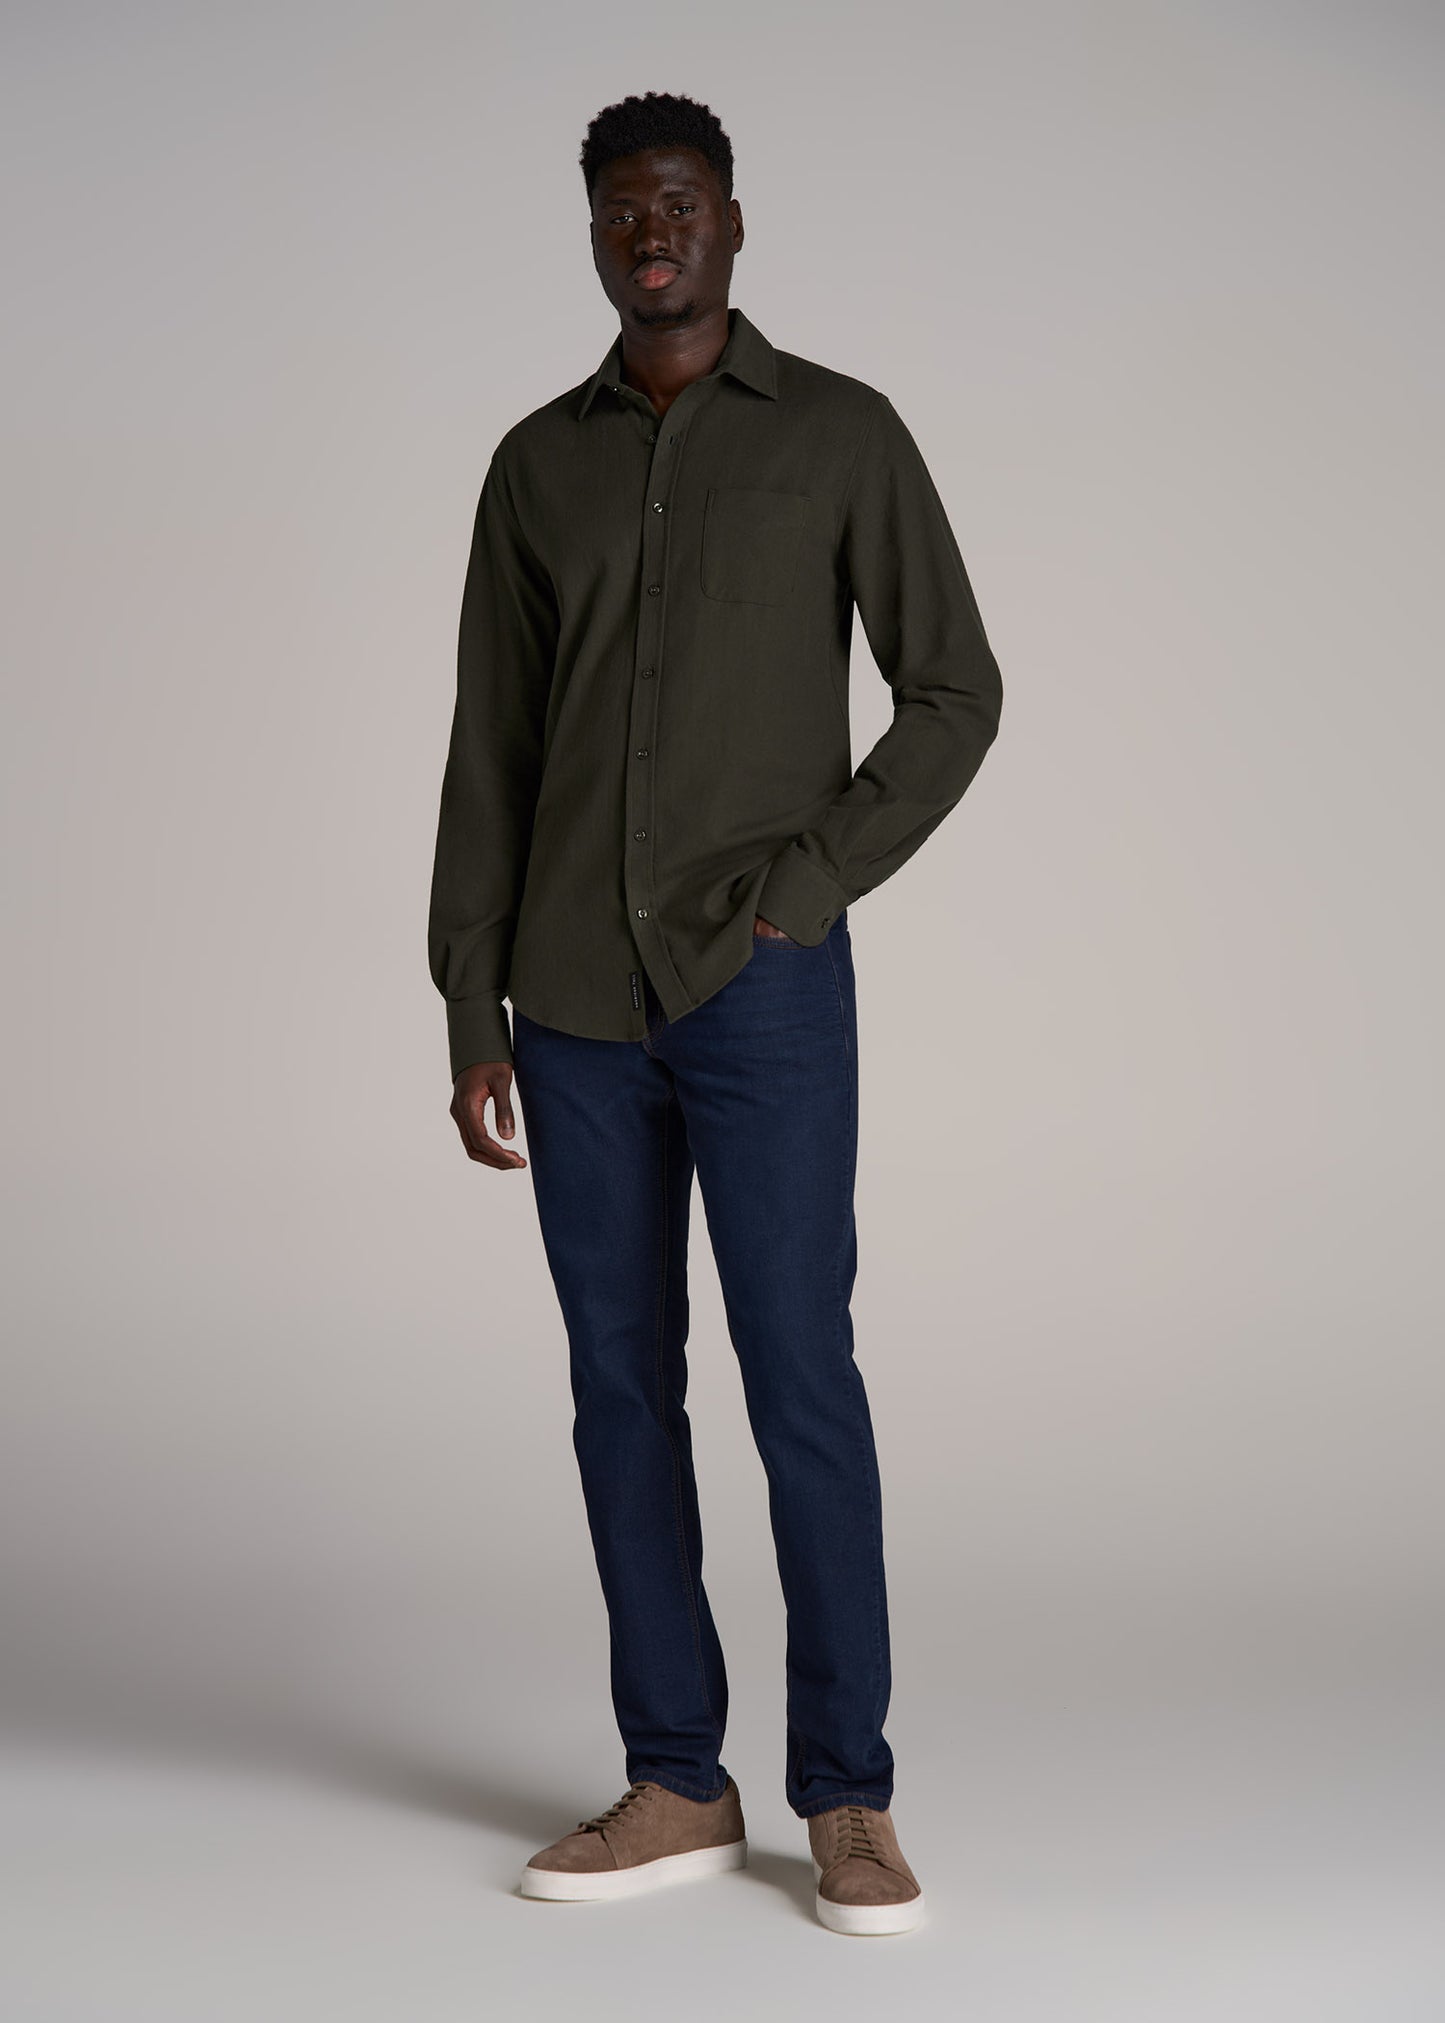 A tall man wearing American Tall's Mason Semi-Relaxed Jeans for Tall Men in Blue Steel with a Nelson Flannel Shirt for Tall Men in Hunter Green.